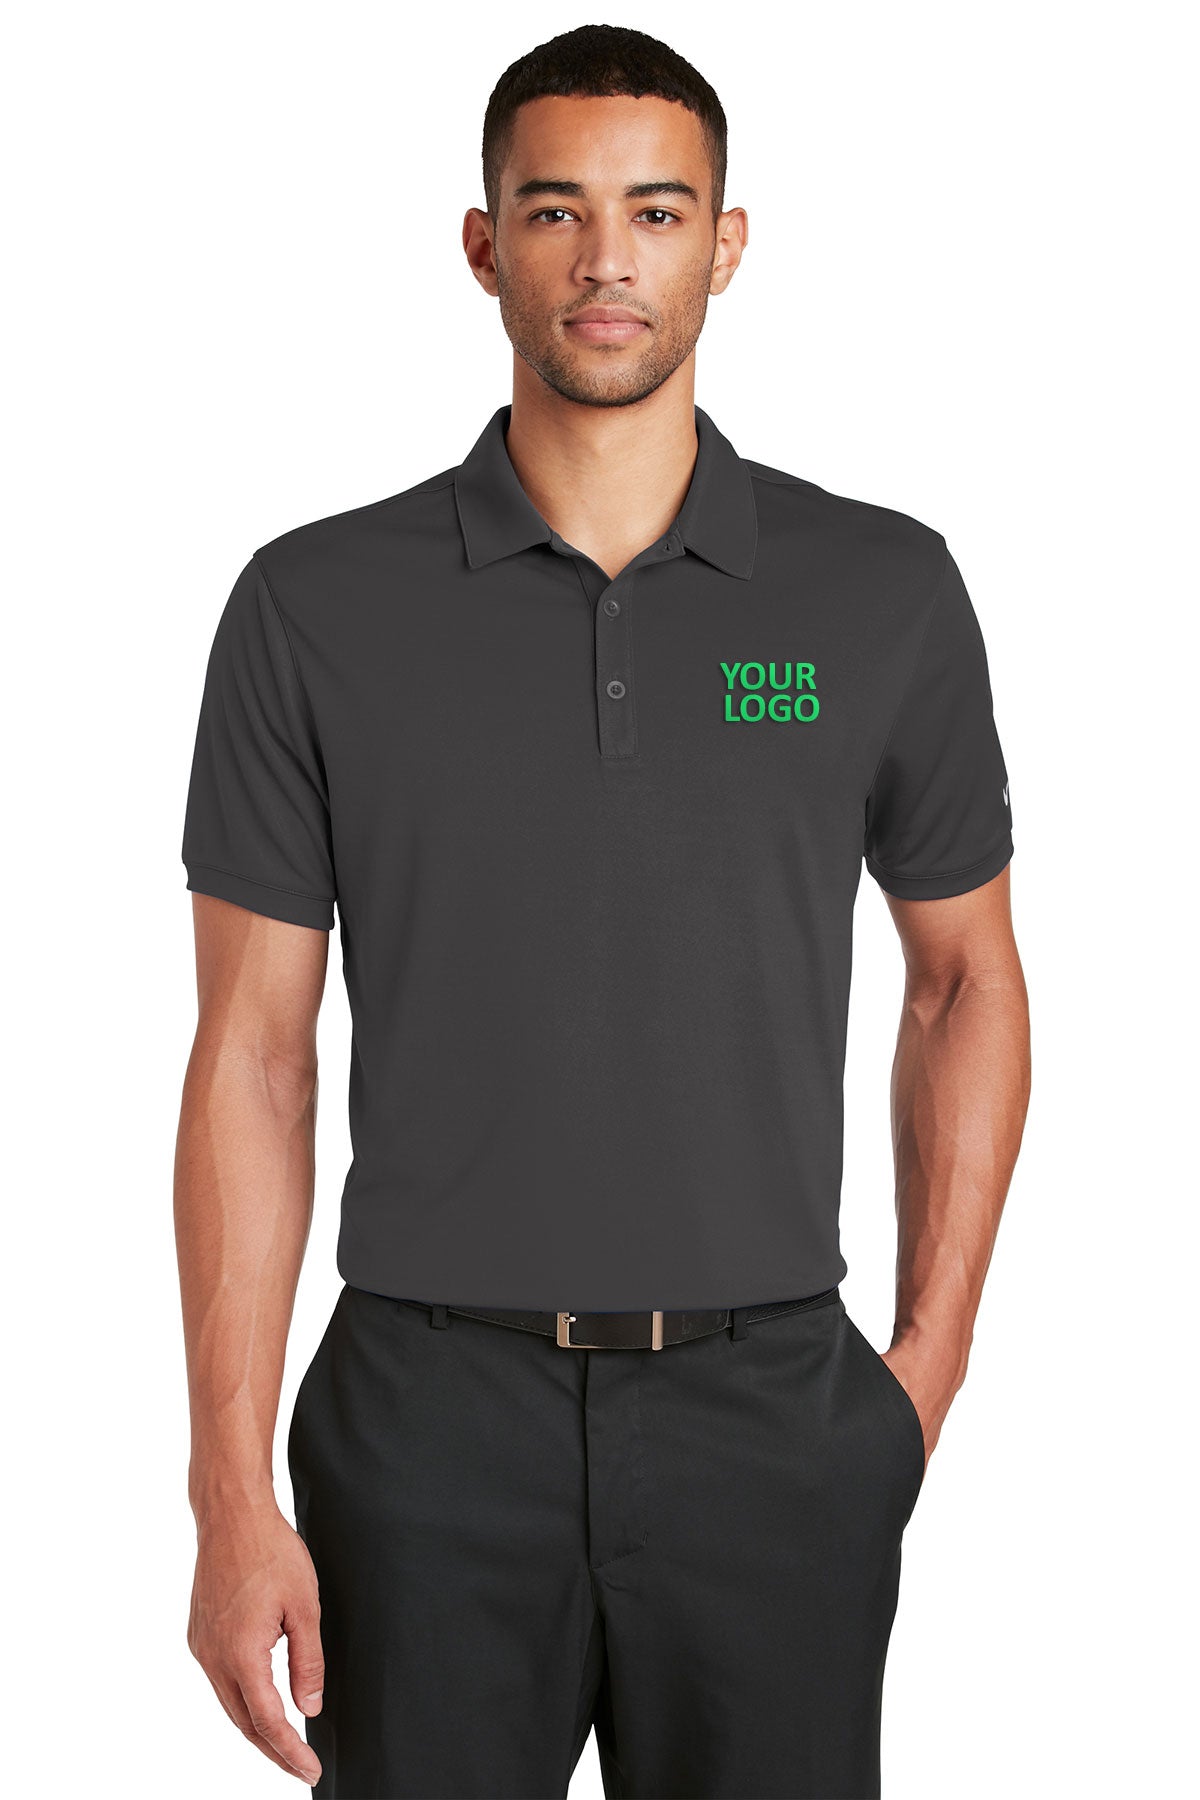 Nike Dri-FIT Players Modern Fit Custom Polos, Anthracite